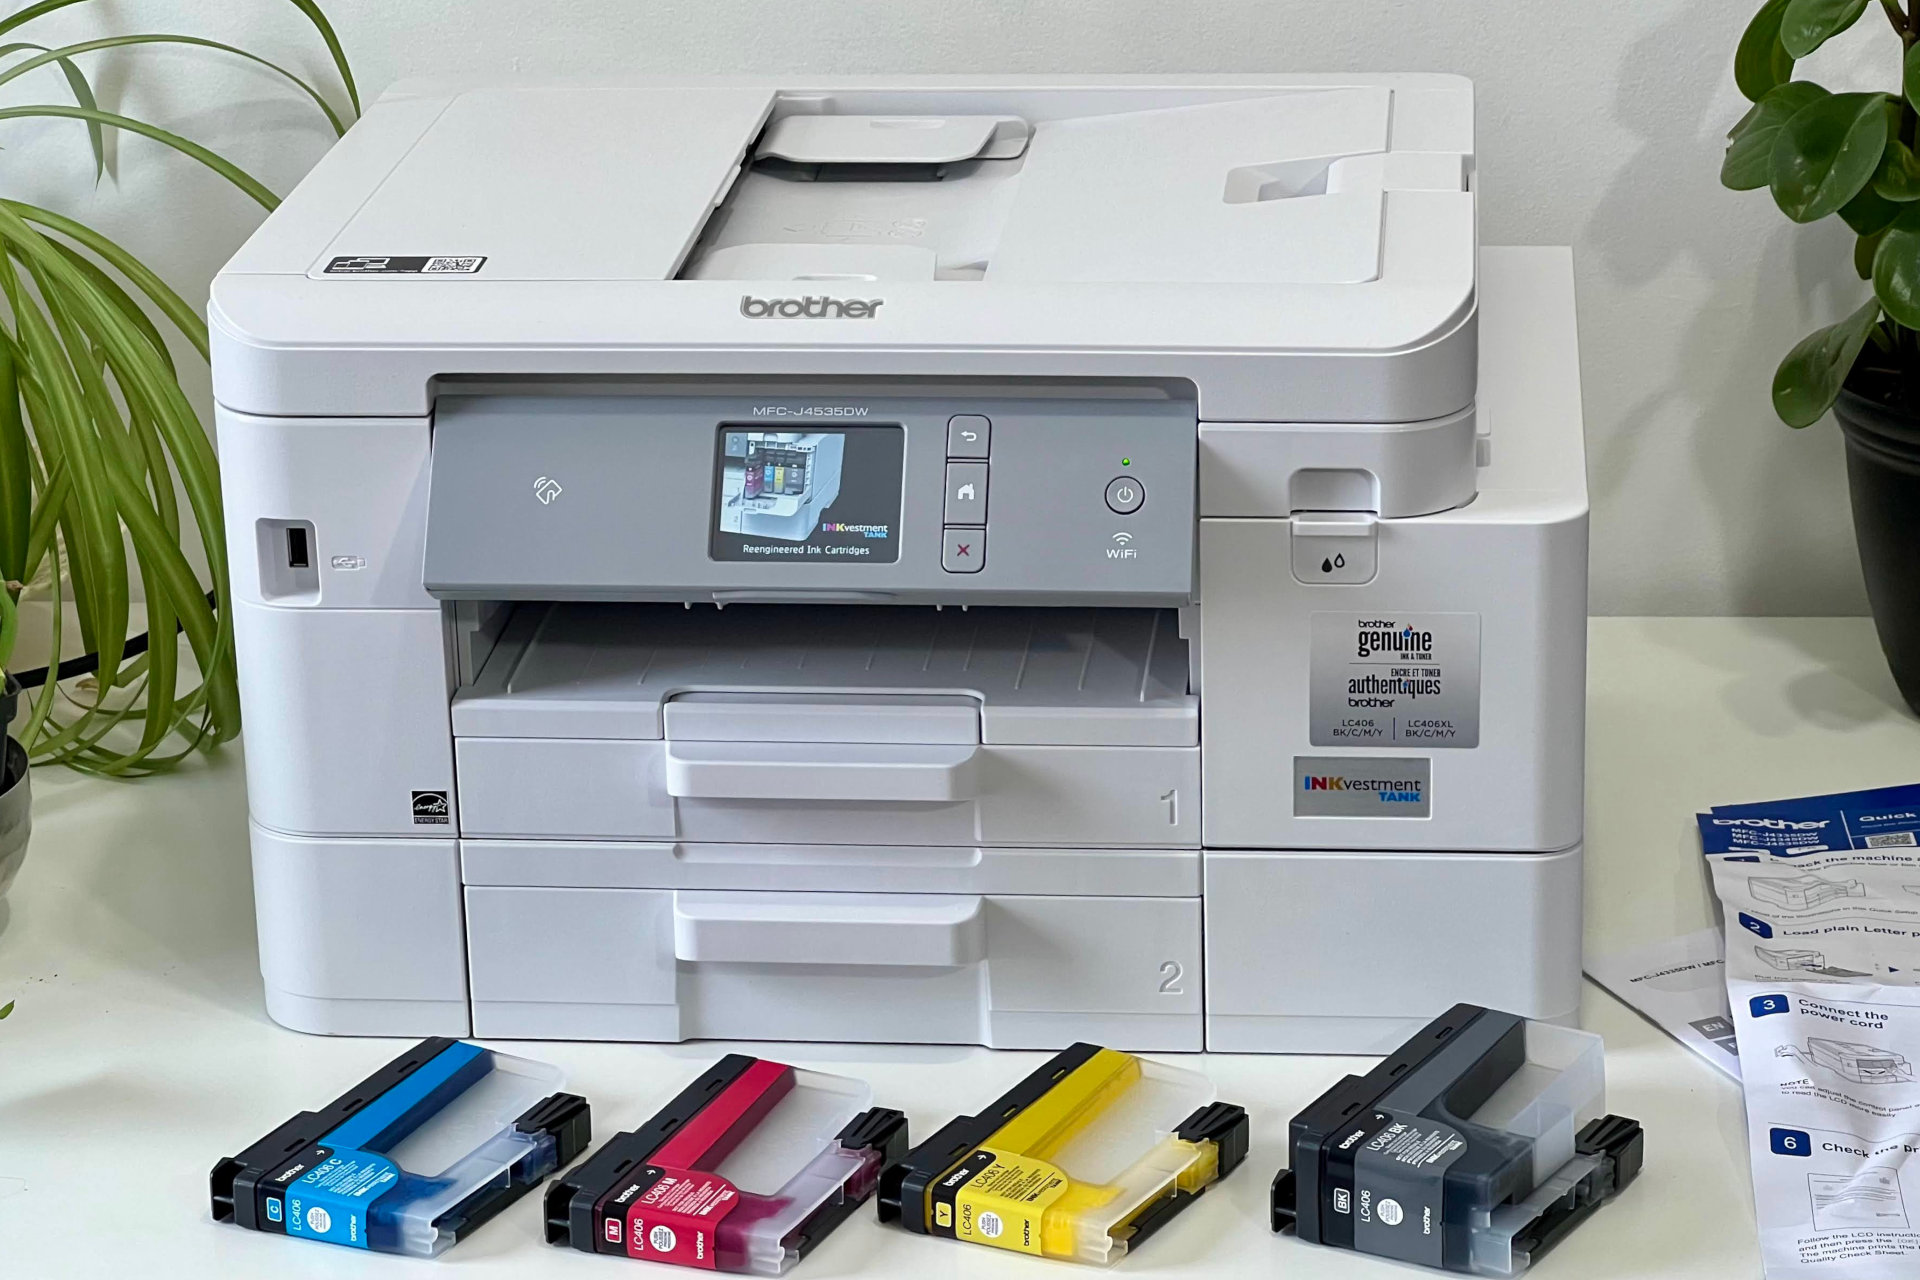 Brother's MFC-J4535DW isn't a true tank printer but the cartridges hold thousands of pages-worth of ink.